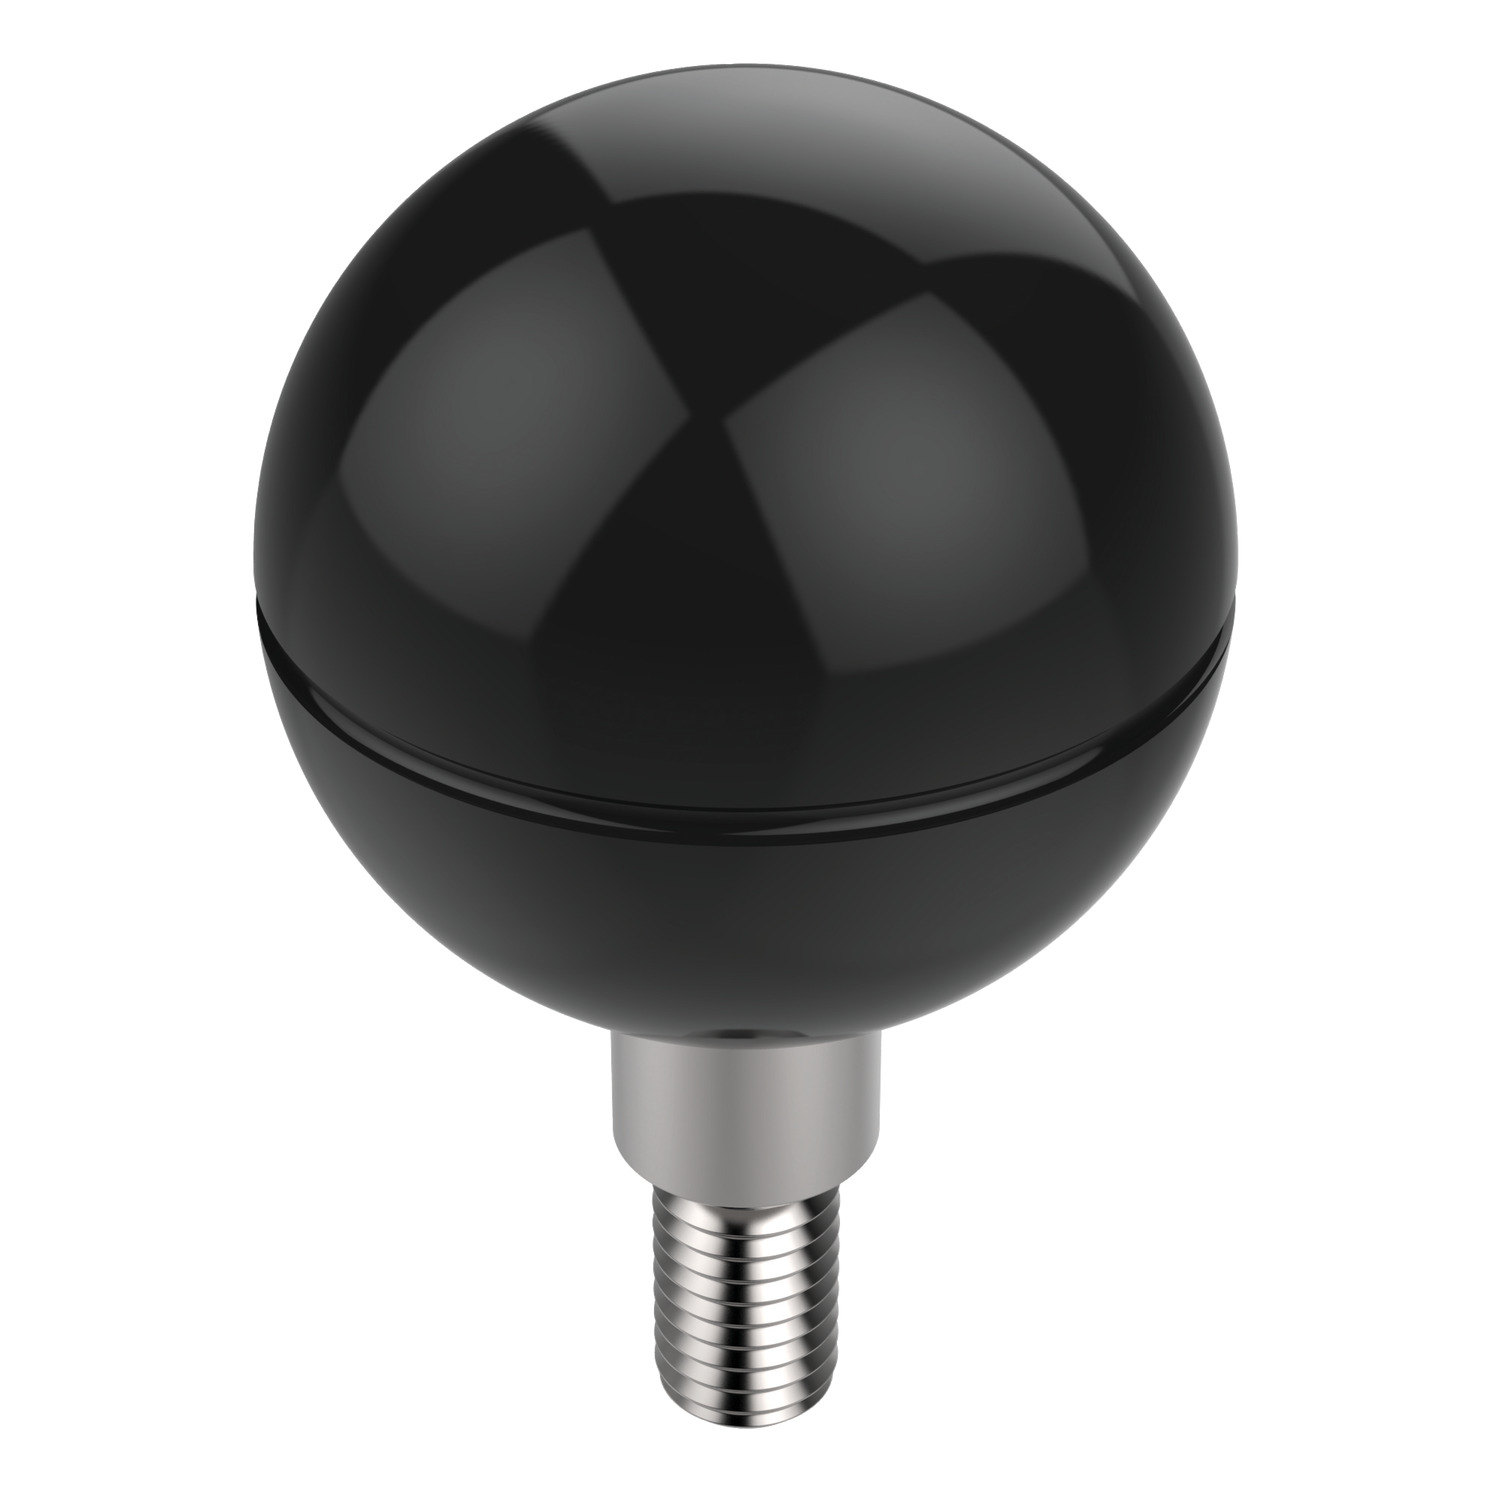 Revolving Ball Knobs Wixroyd have some of the most popular knobs going including ball shaped, see what we can offer below.